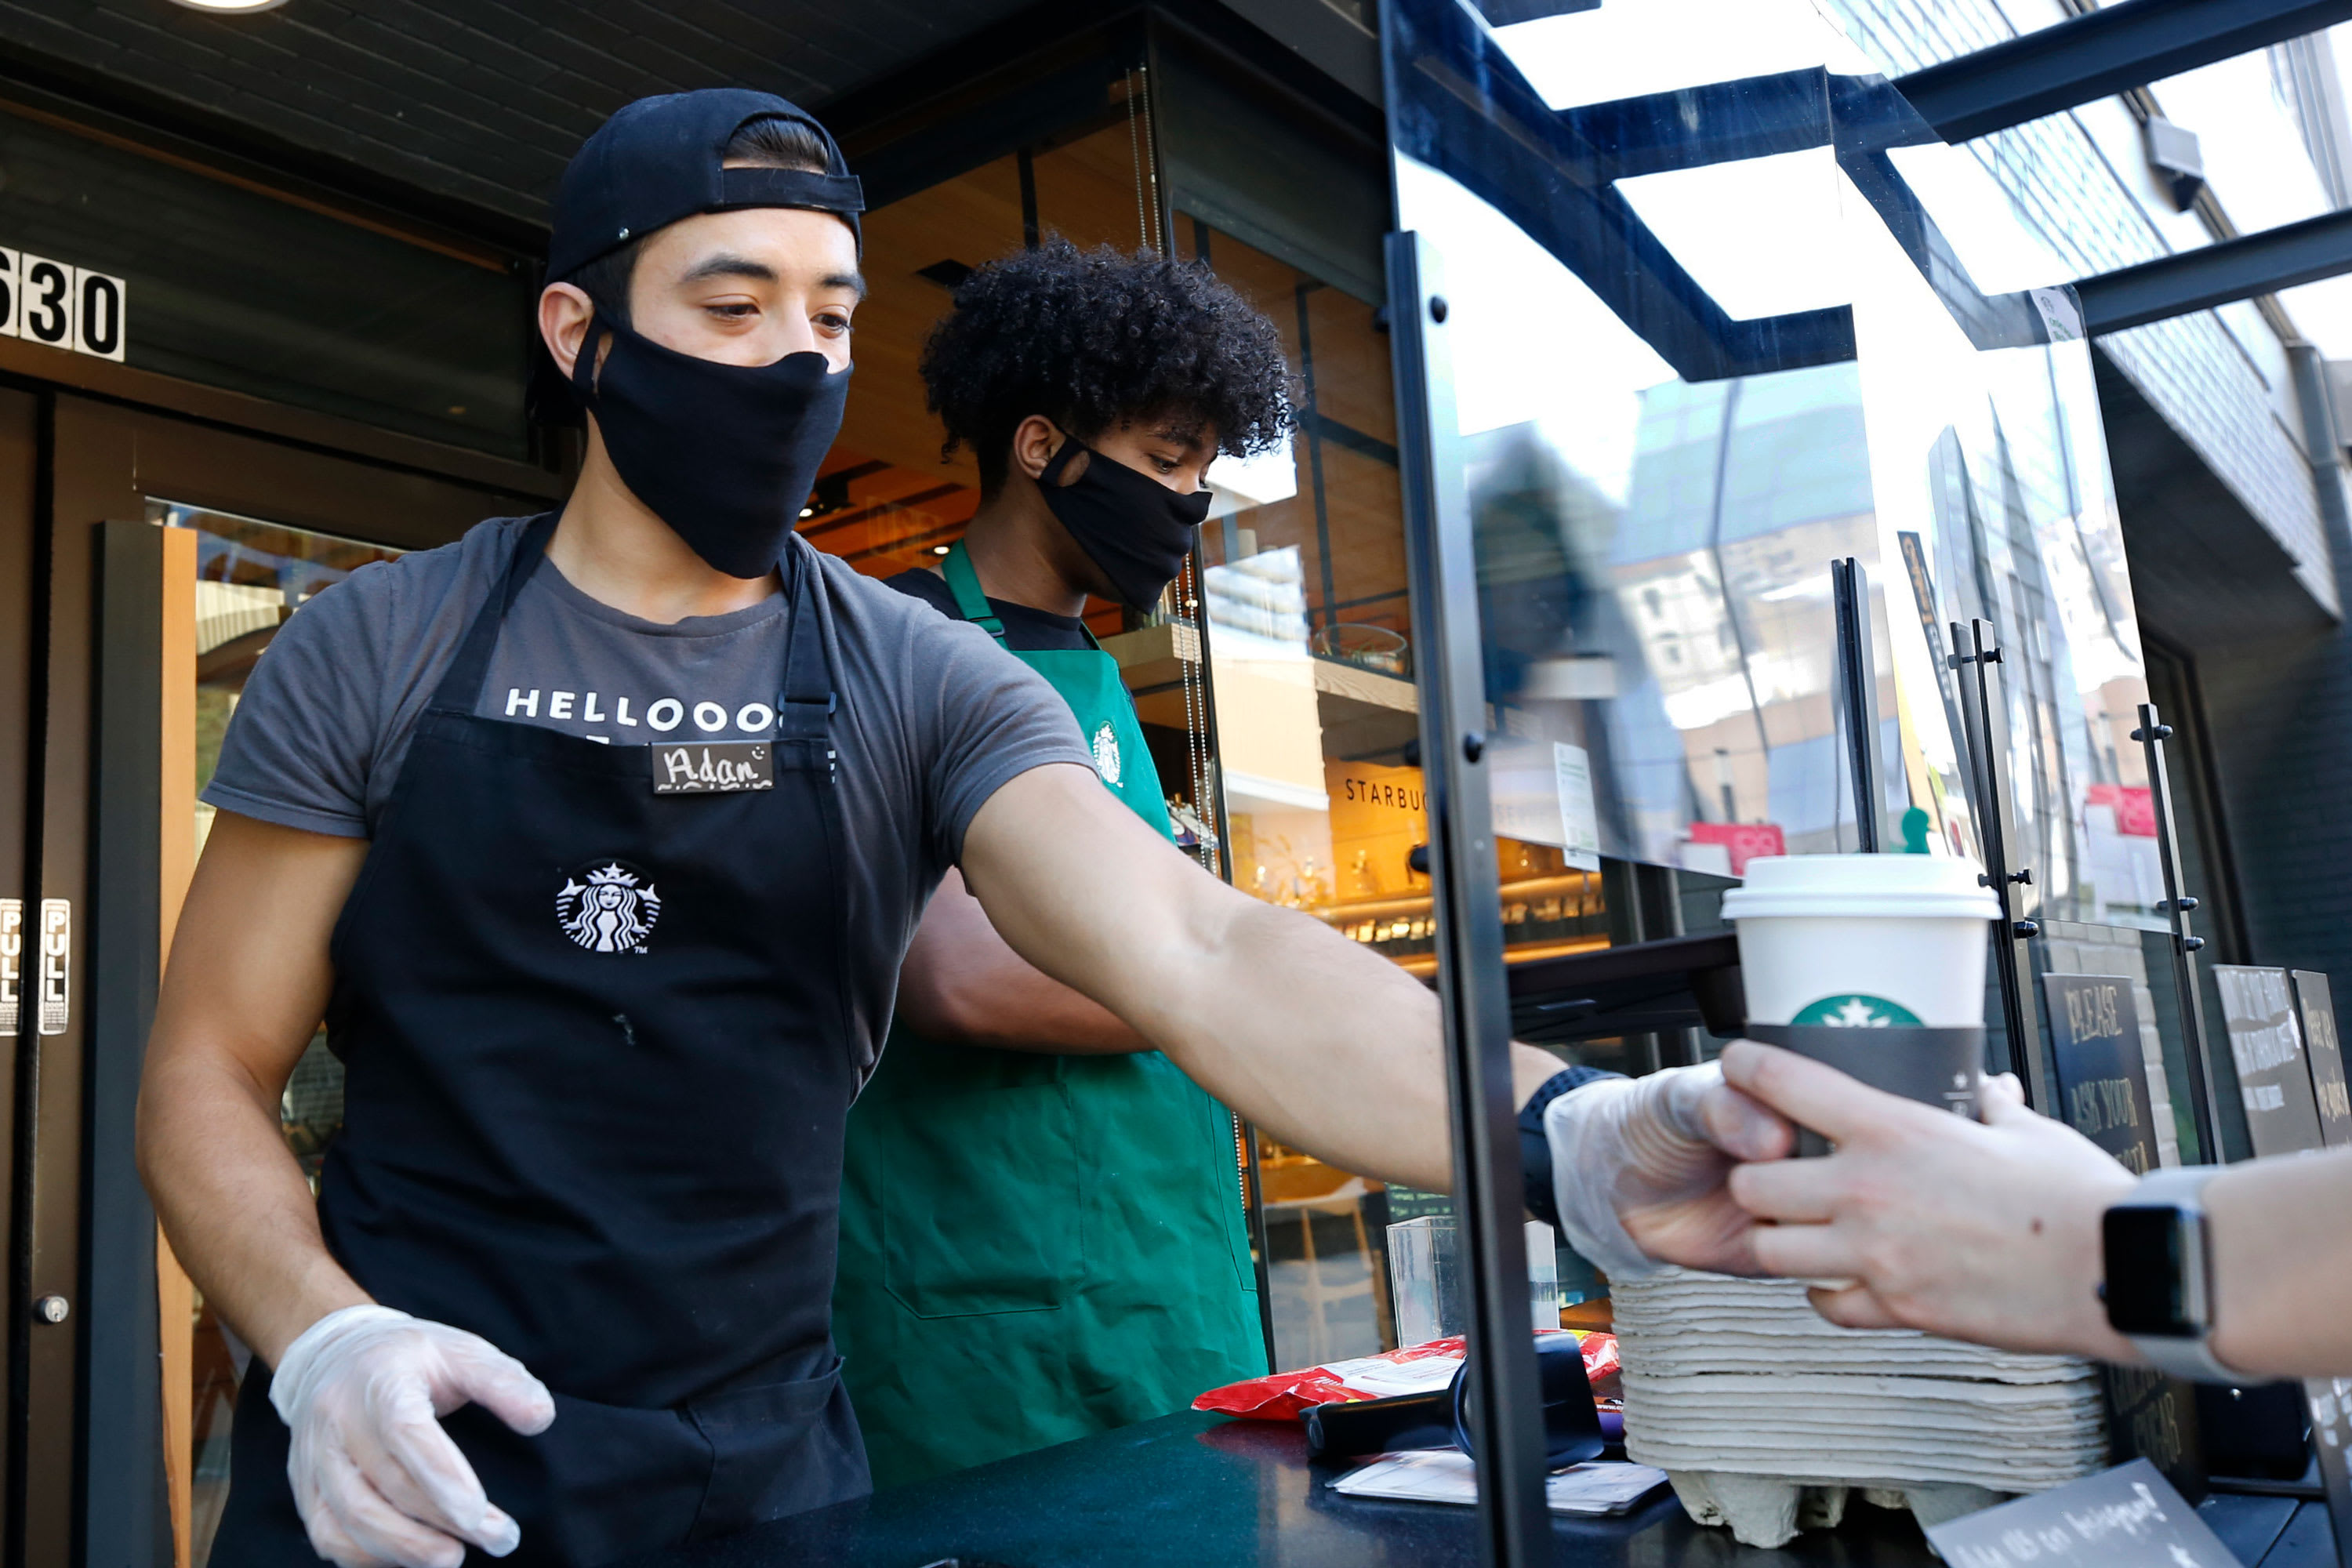 Starbucks will require customers wear facial coverings